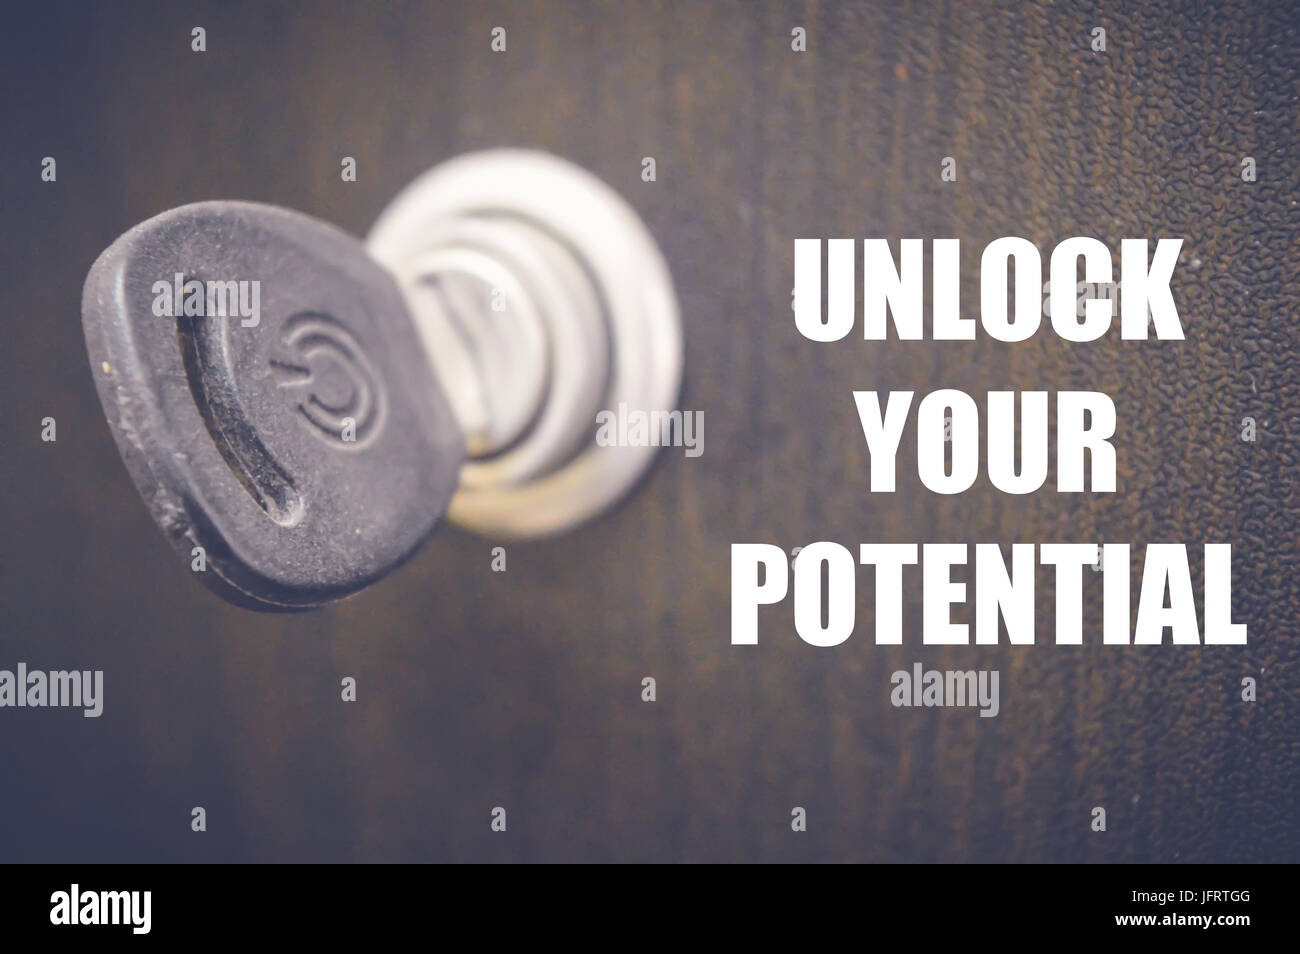 unlock your potential concept background Stock Photo